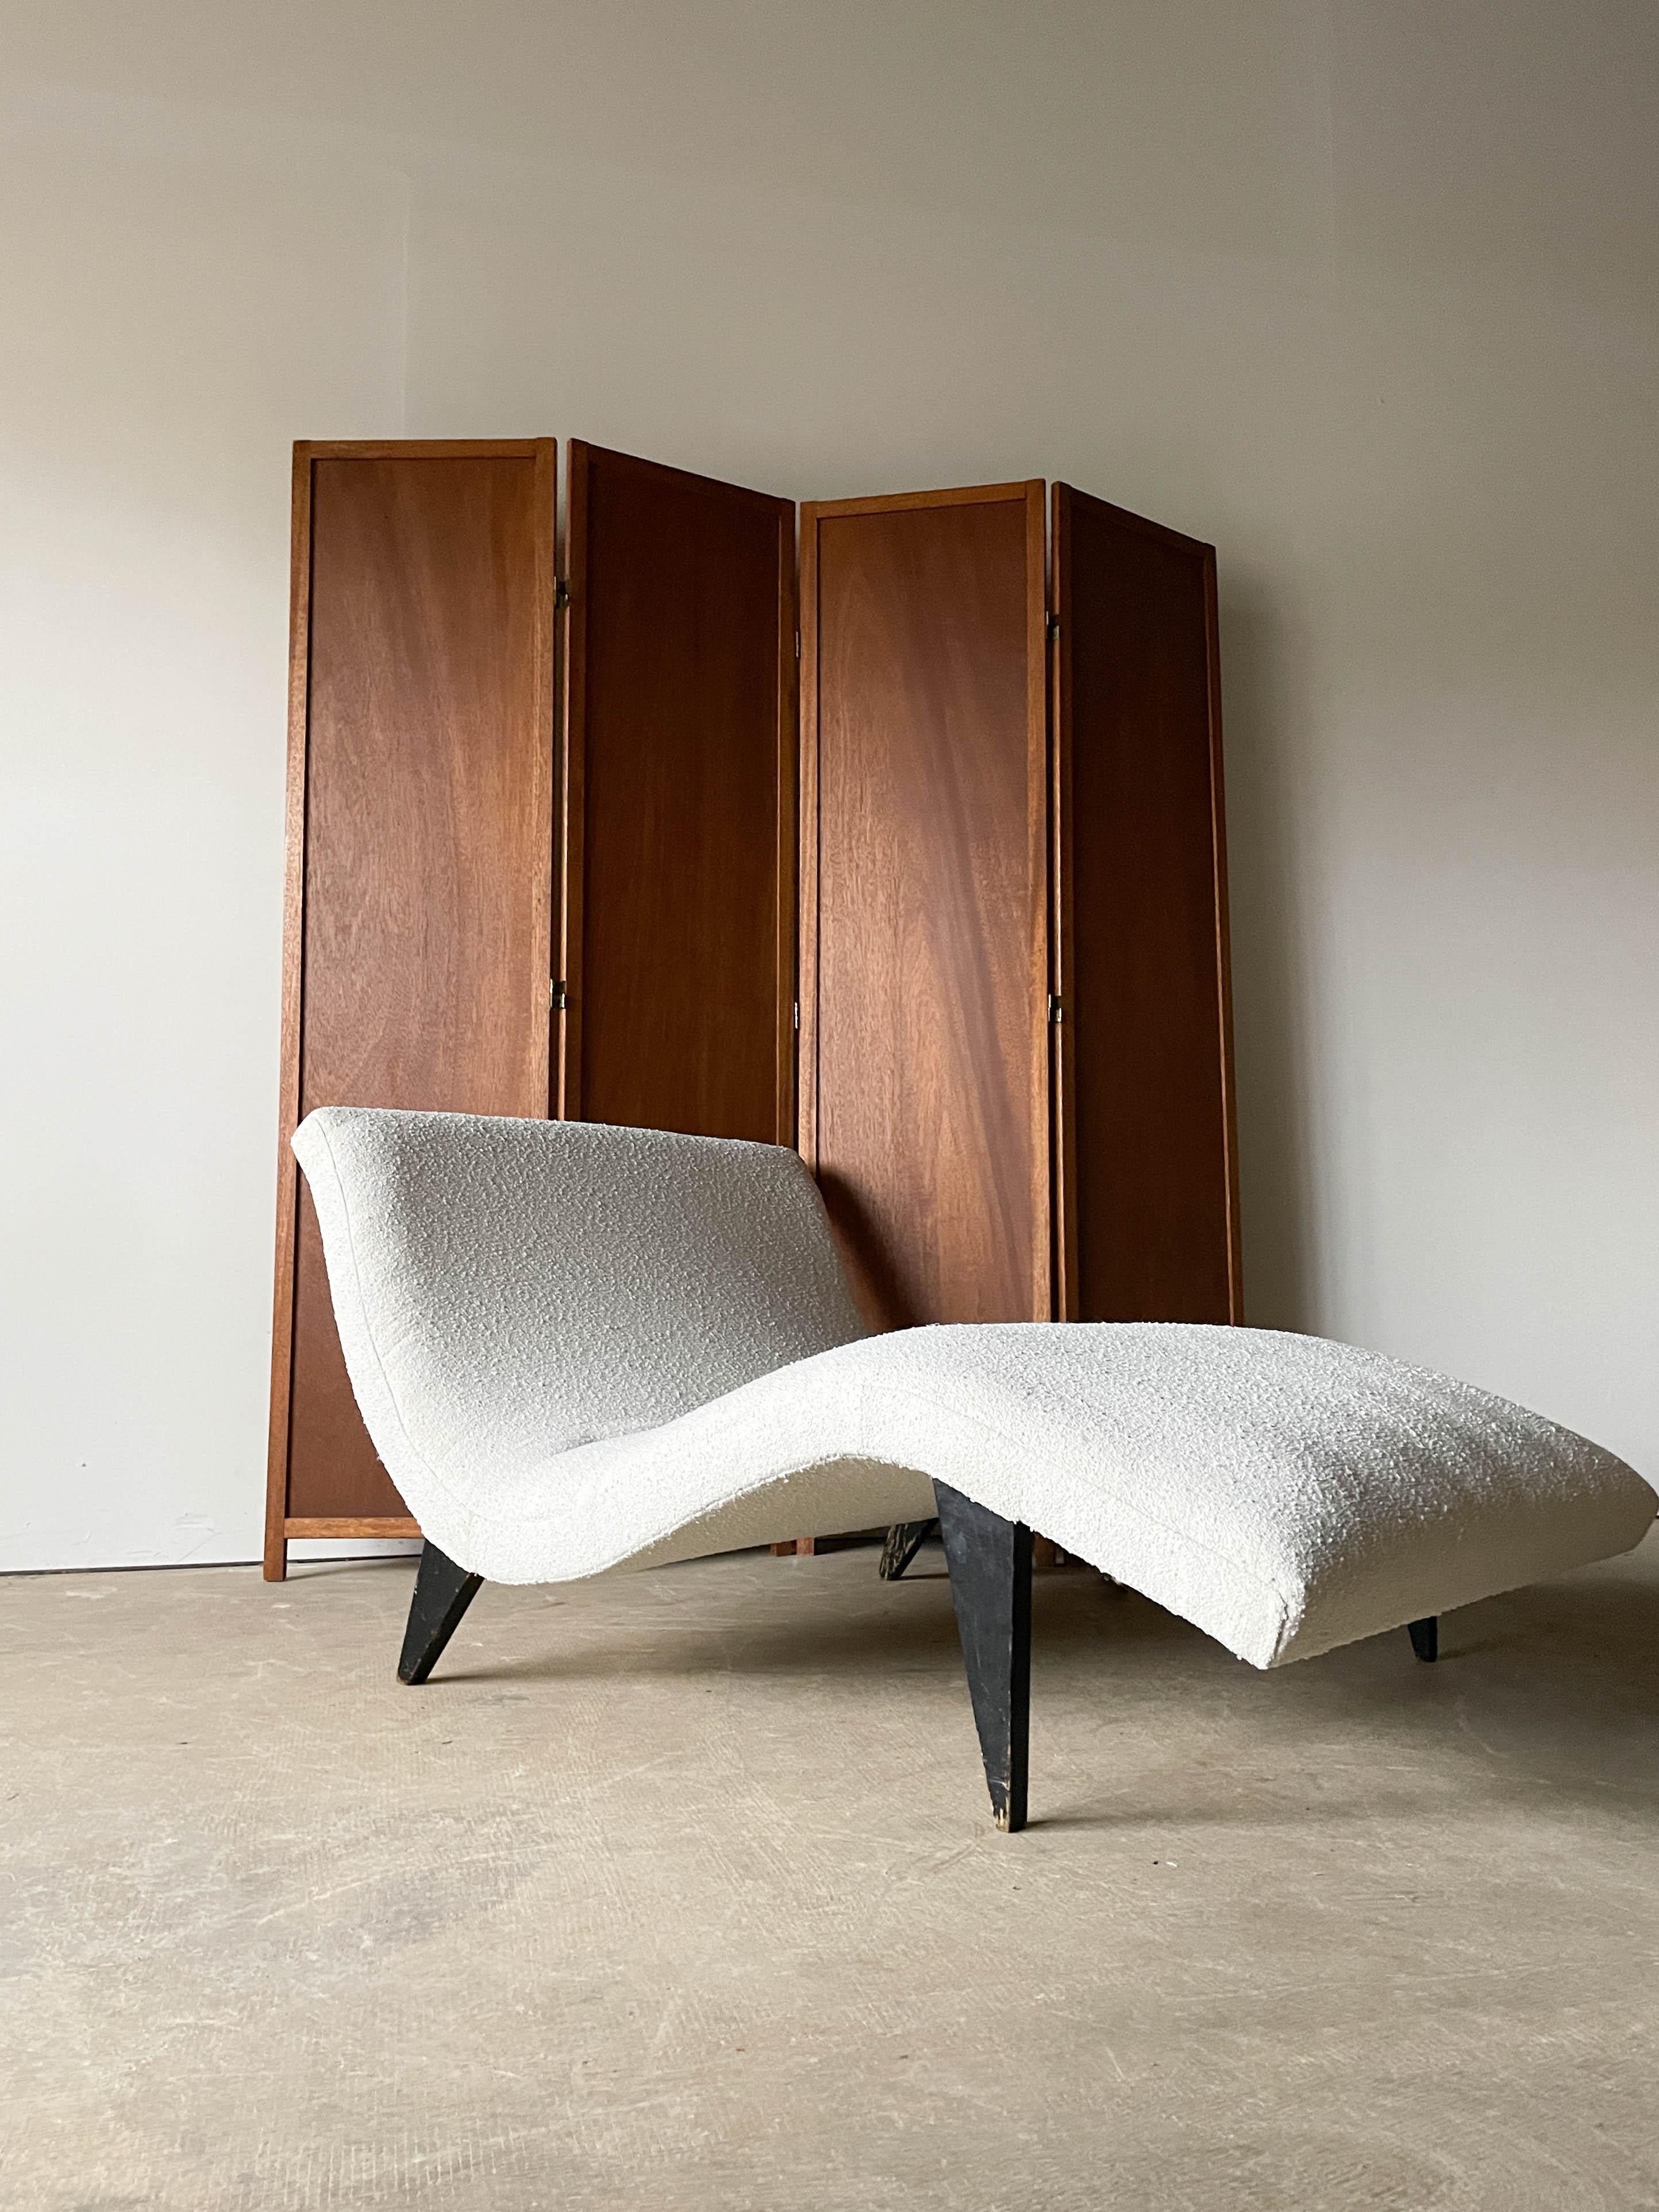 Rare and Early chaise longue designed by Greta Grossman Magnusson for Sherman Bertram in the early 1950s. This example is a wider Twin version as shown in the newspaper advert from 1953. Featuring sublime curves and high contrast ebonized oak legs,